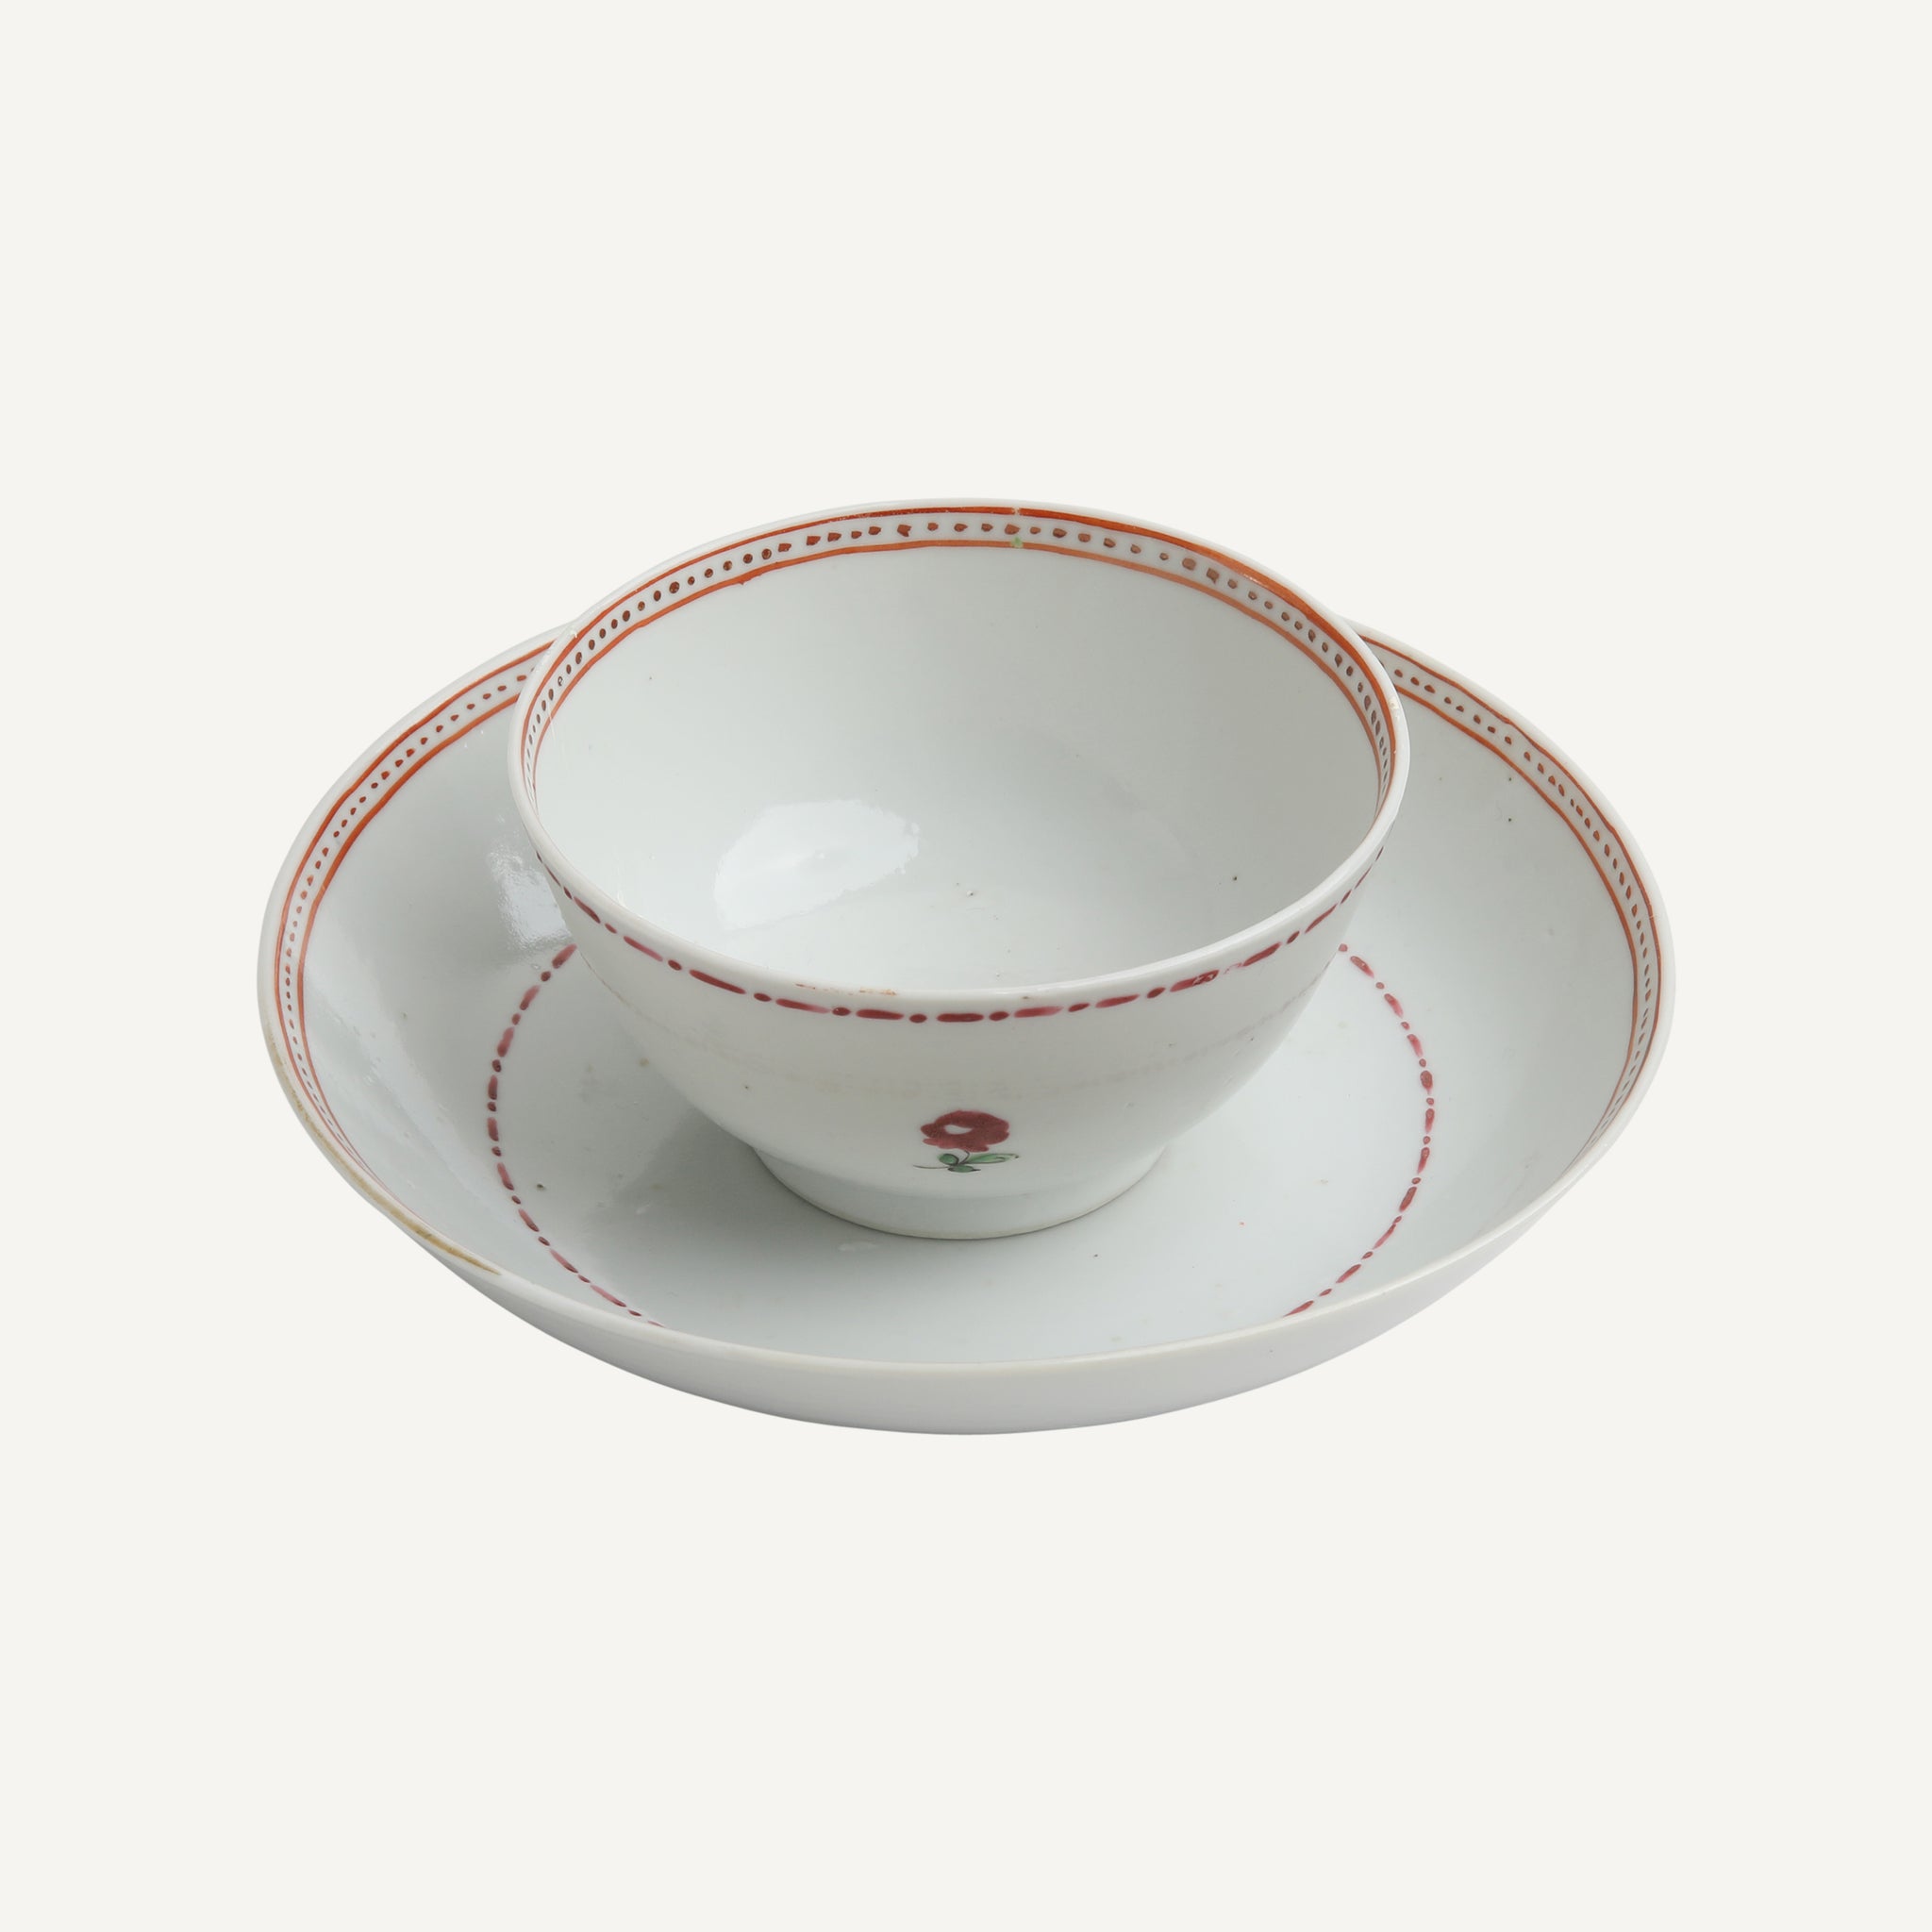 ANTIQUE CHINESE EXPORT CUP AND SAUCER